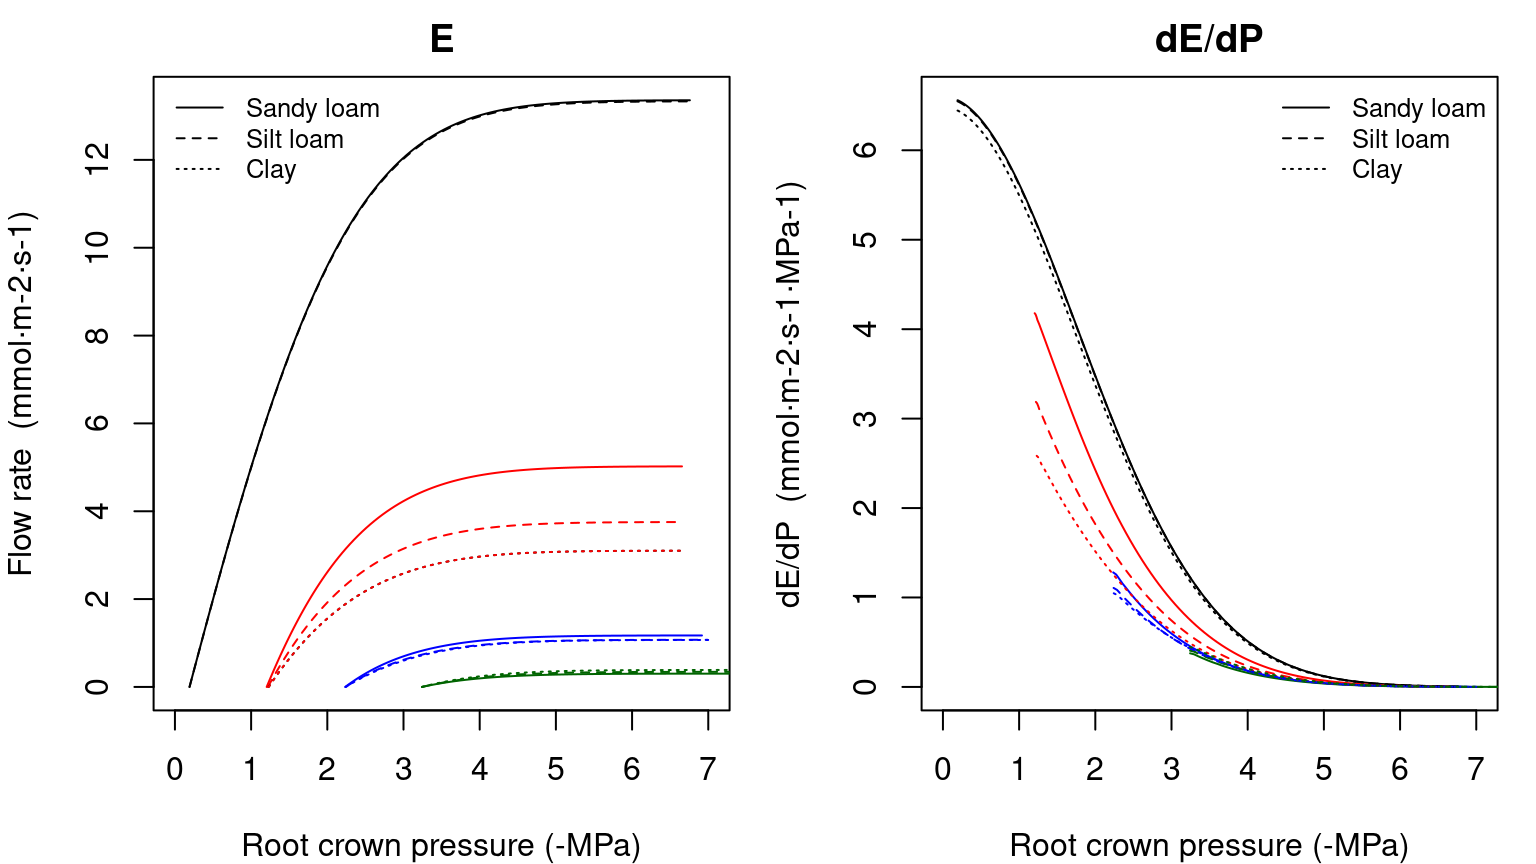 Example of supply function for a root system (left) and its derivative (right) under different soil textures and starting from different soil water potential vectors.